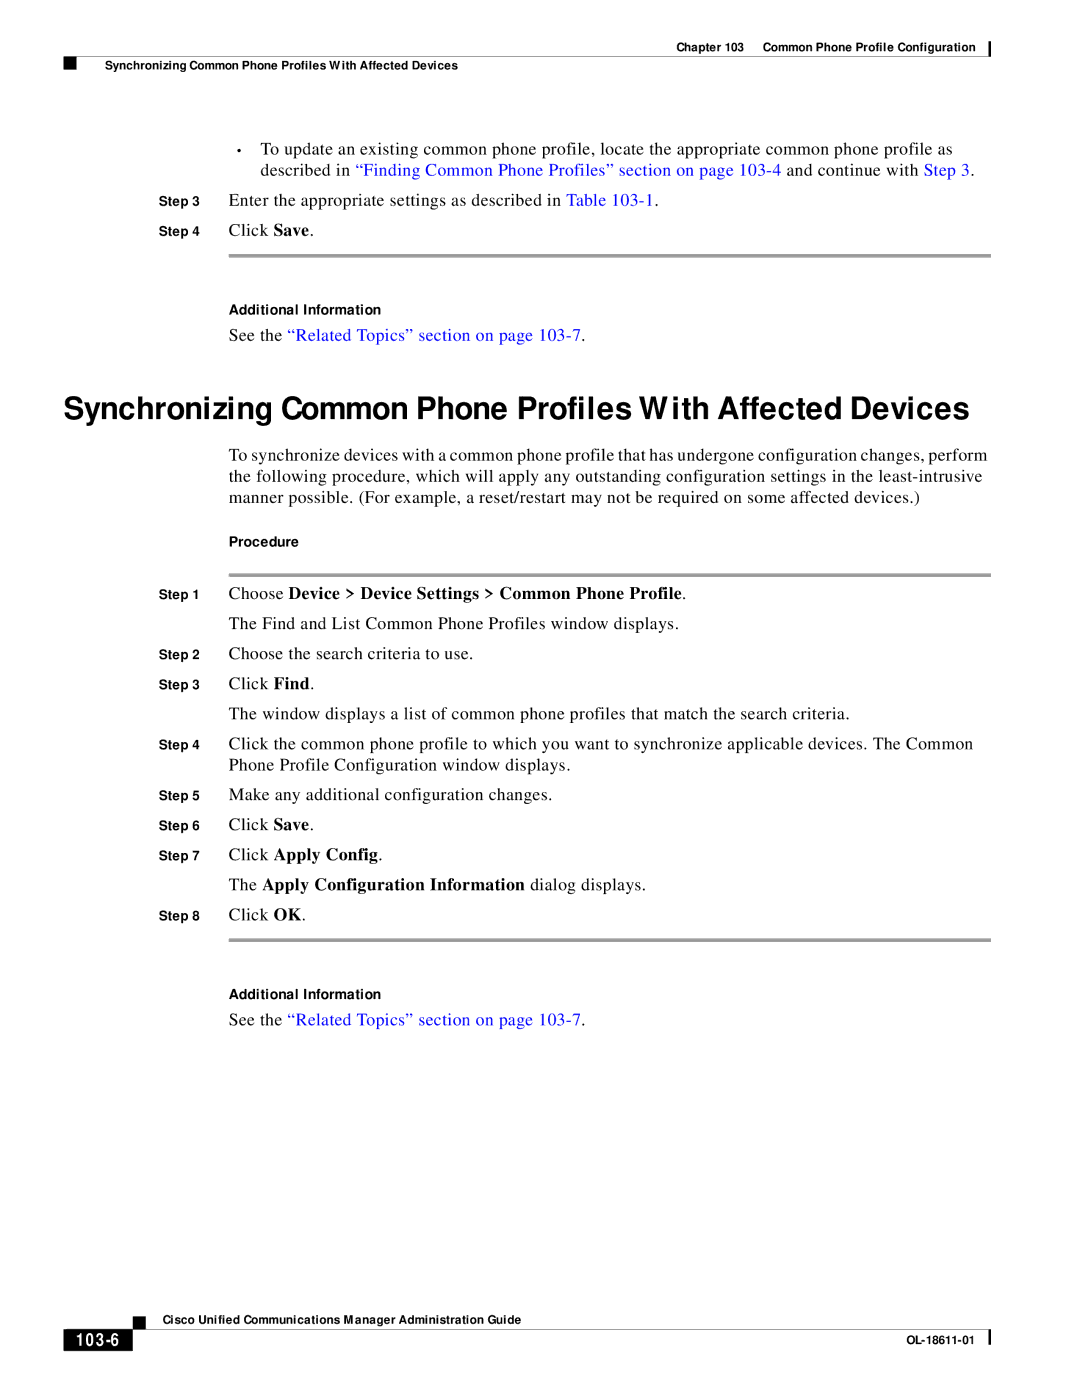 Cisco Systems OL-18611-01 manual Synchronizing Common Phone Profiles With Affected Devices, 103-6 